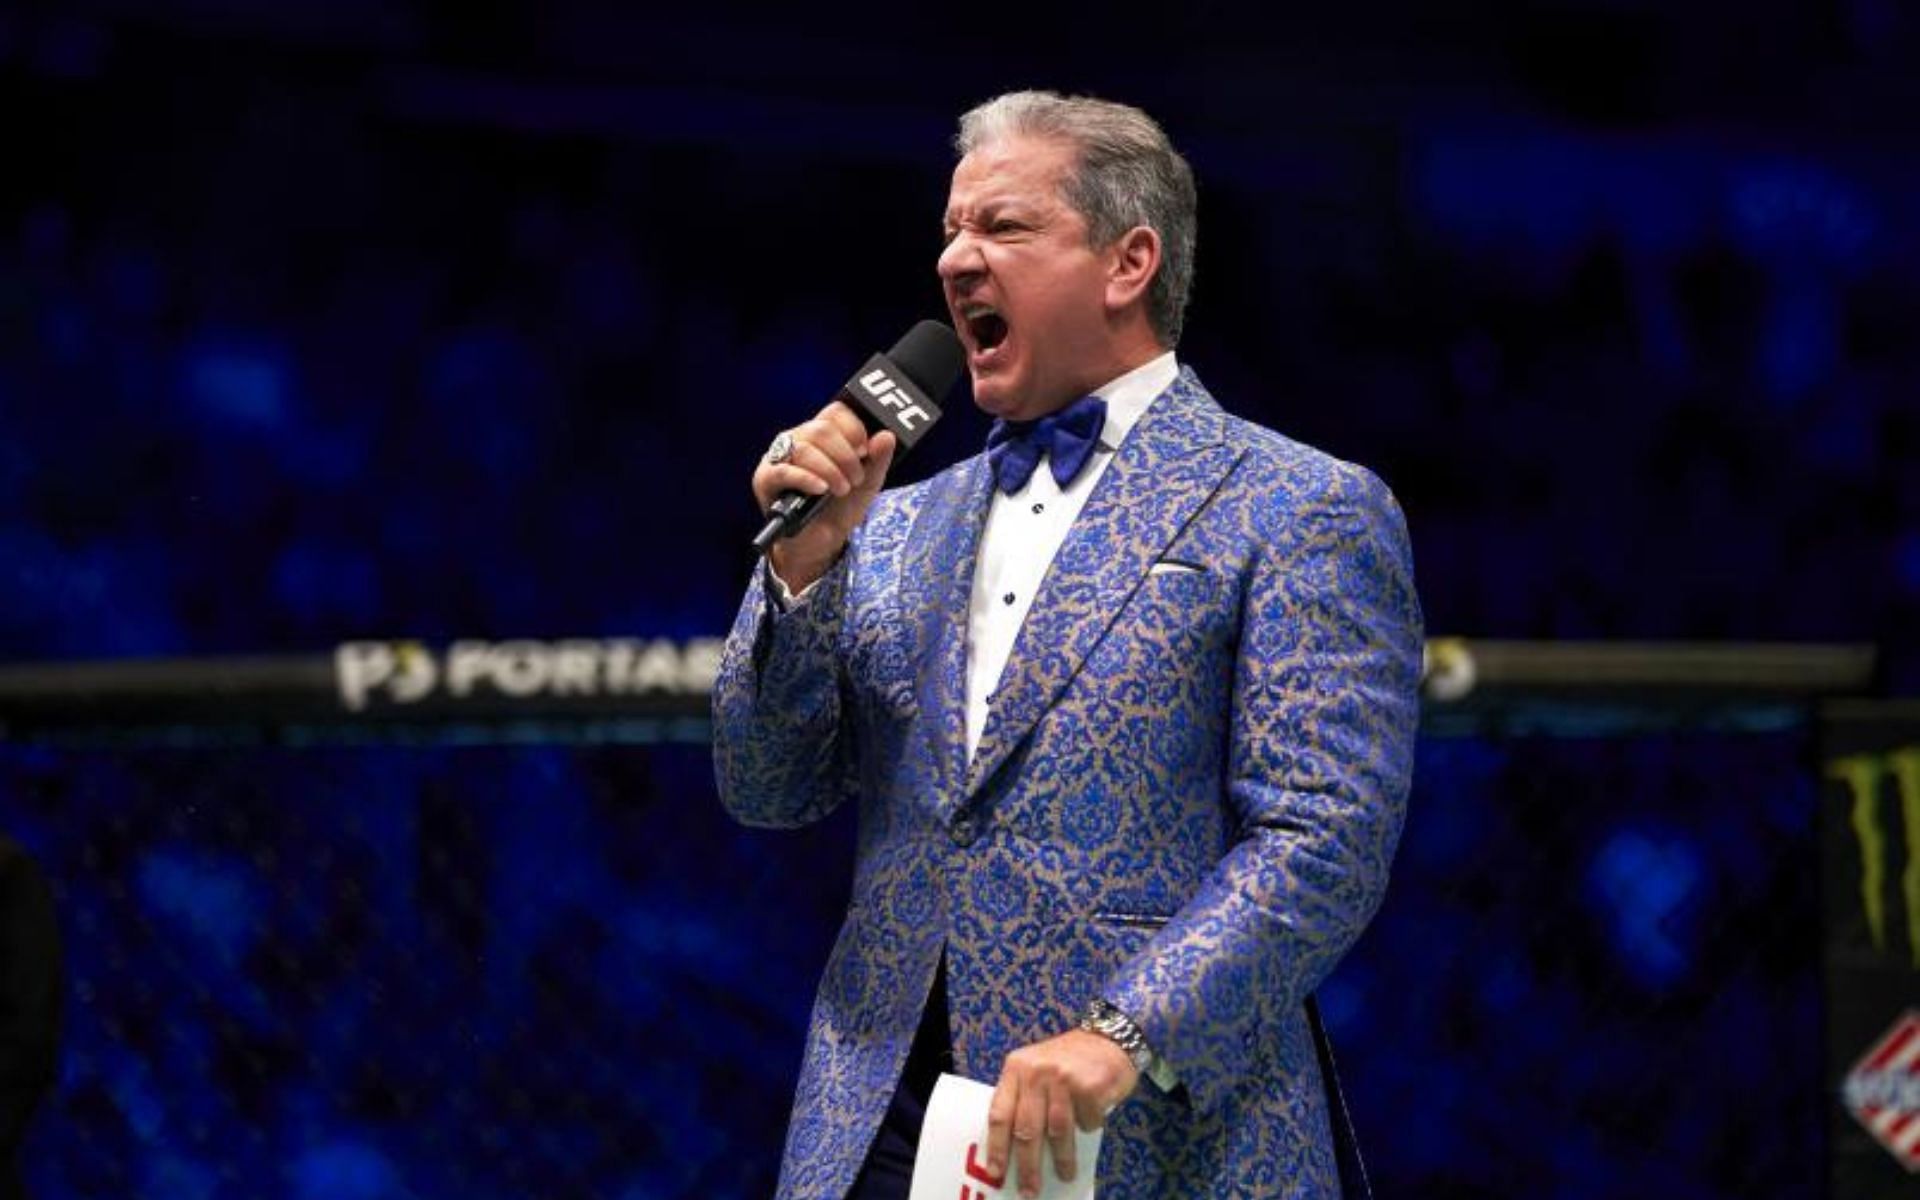 Bruce Buffer at UFC Fight Tonight [Image courtesy: Getty]